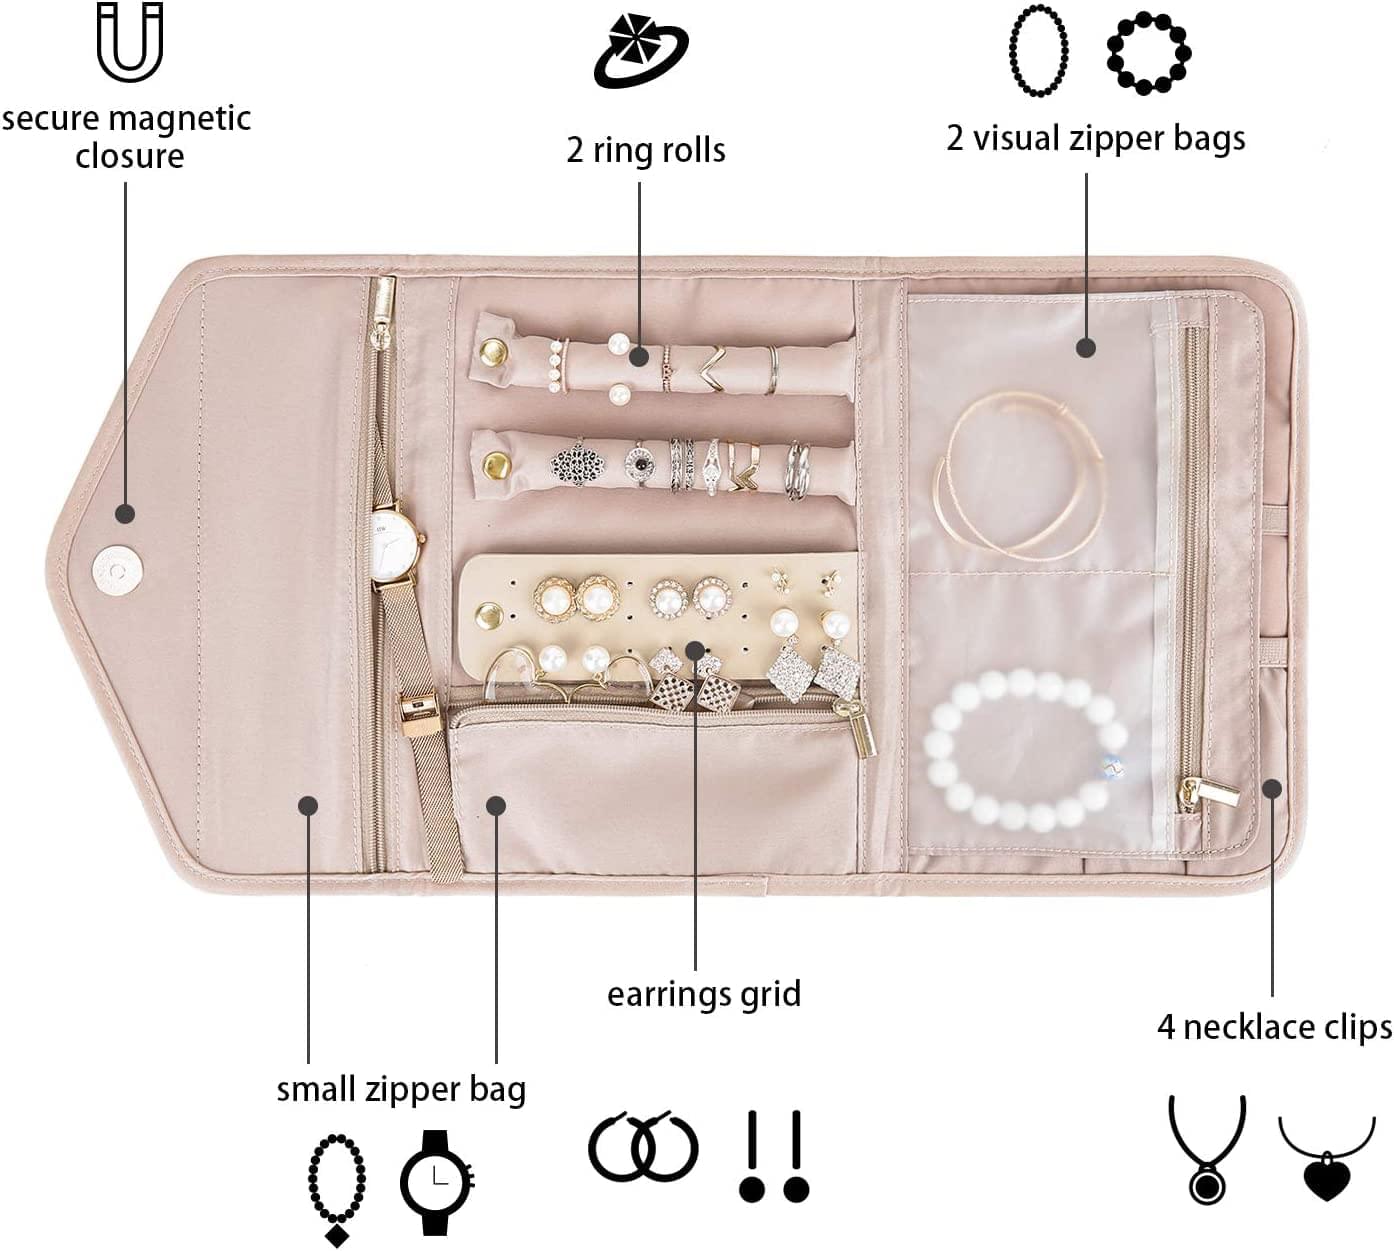 Jewellery Organisers Travel Organizer Bag For Earrings, Rings, Necklace, Chain, Organiser Pouch For Gold Accessories Storage Women Girls 